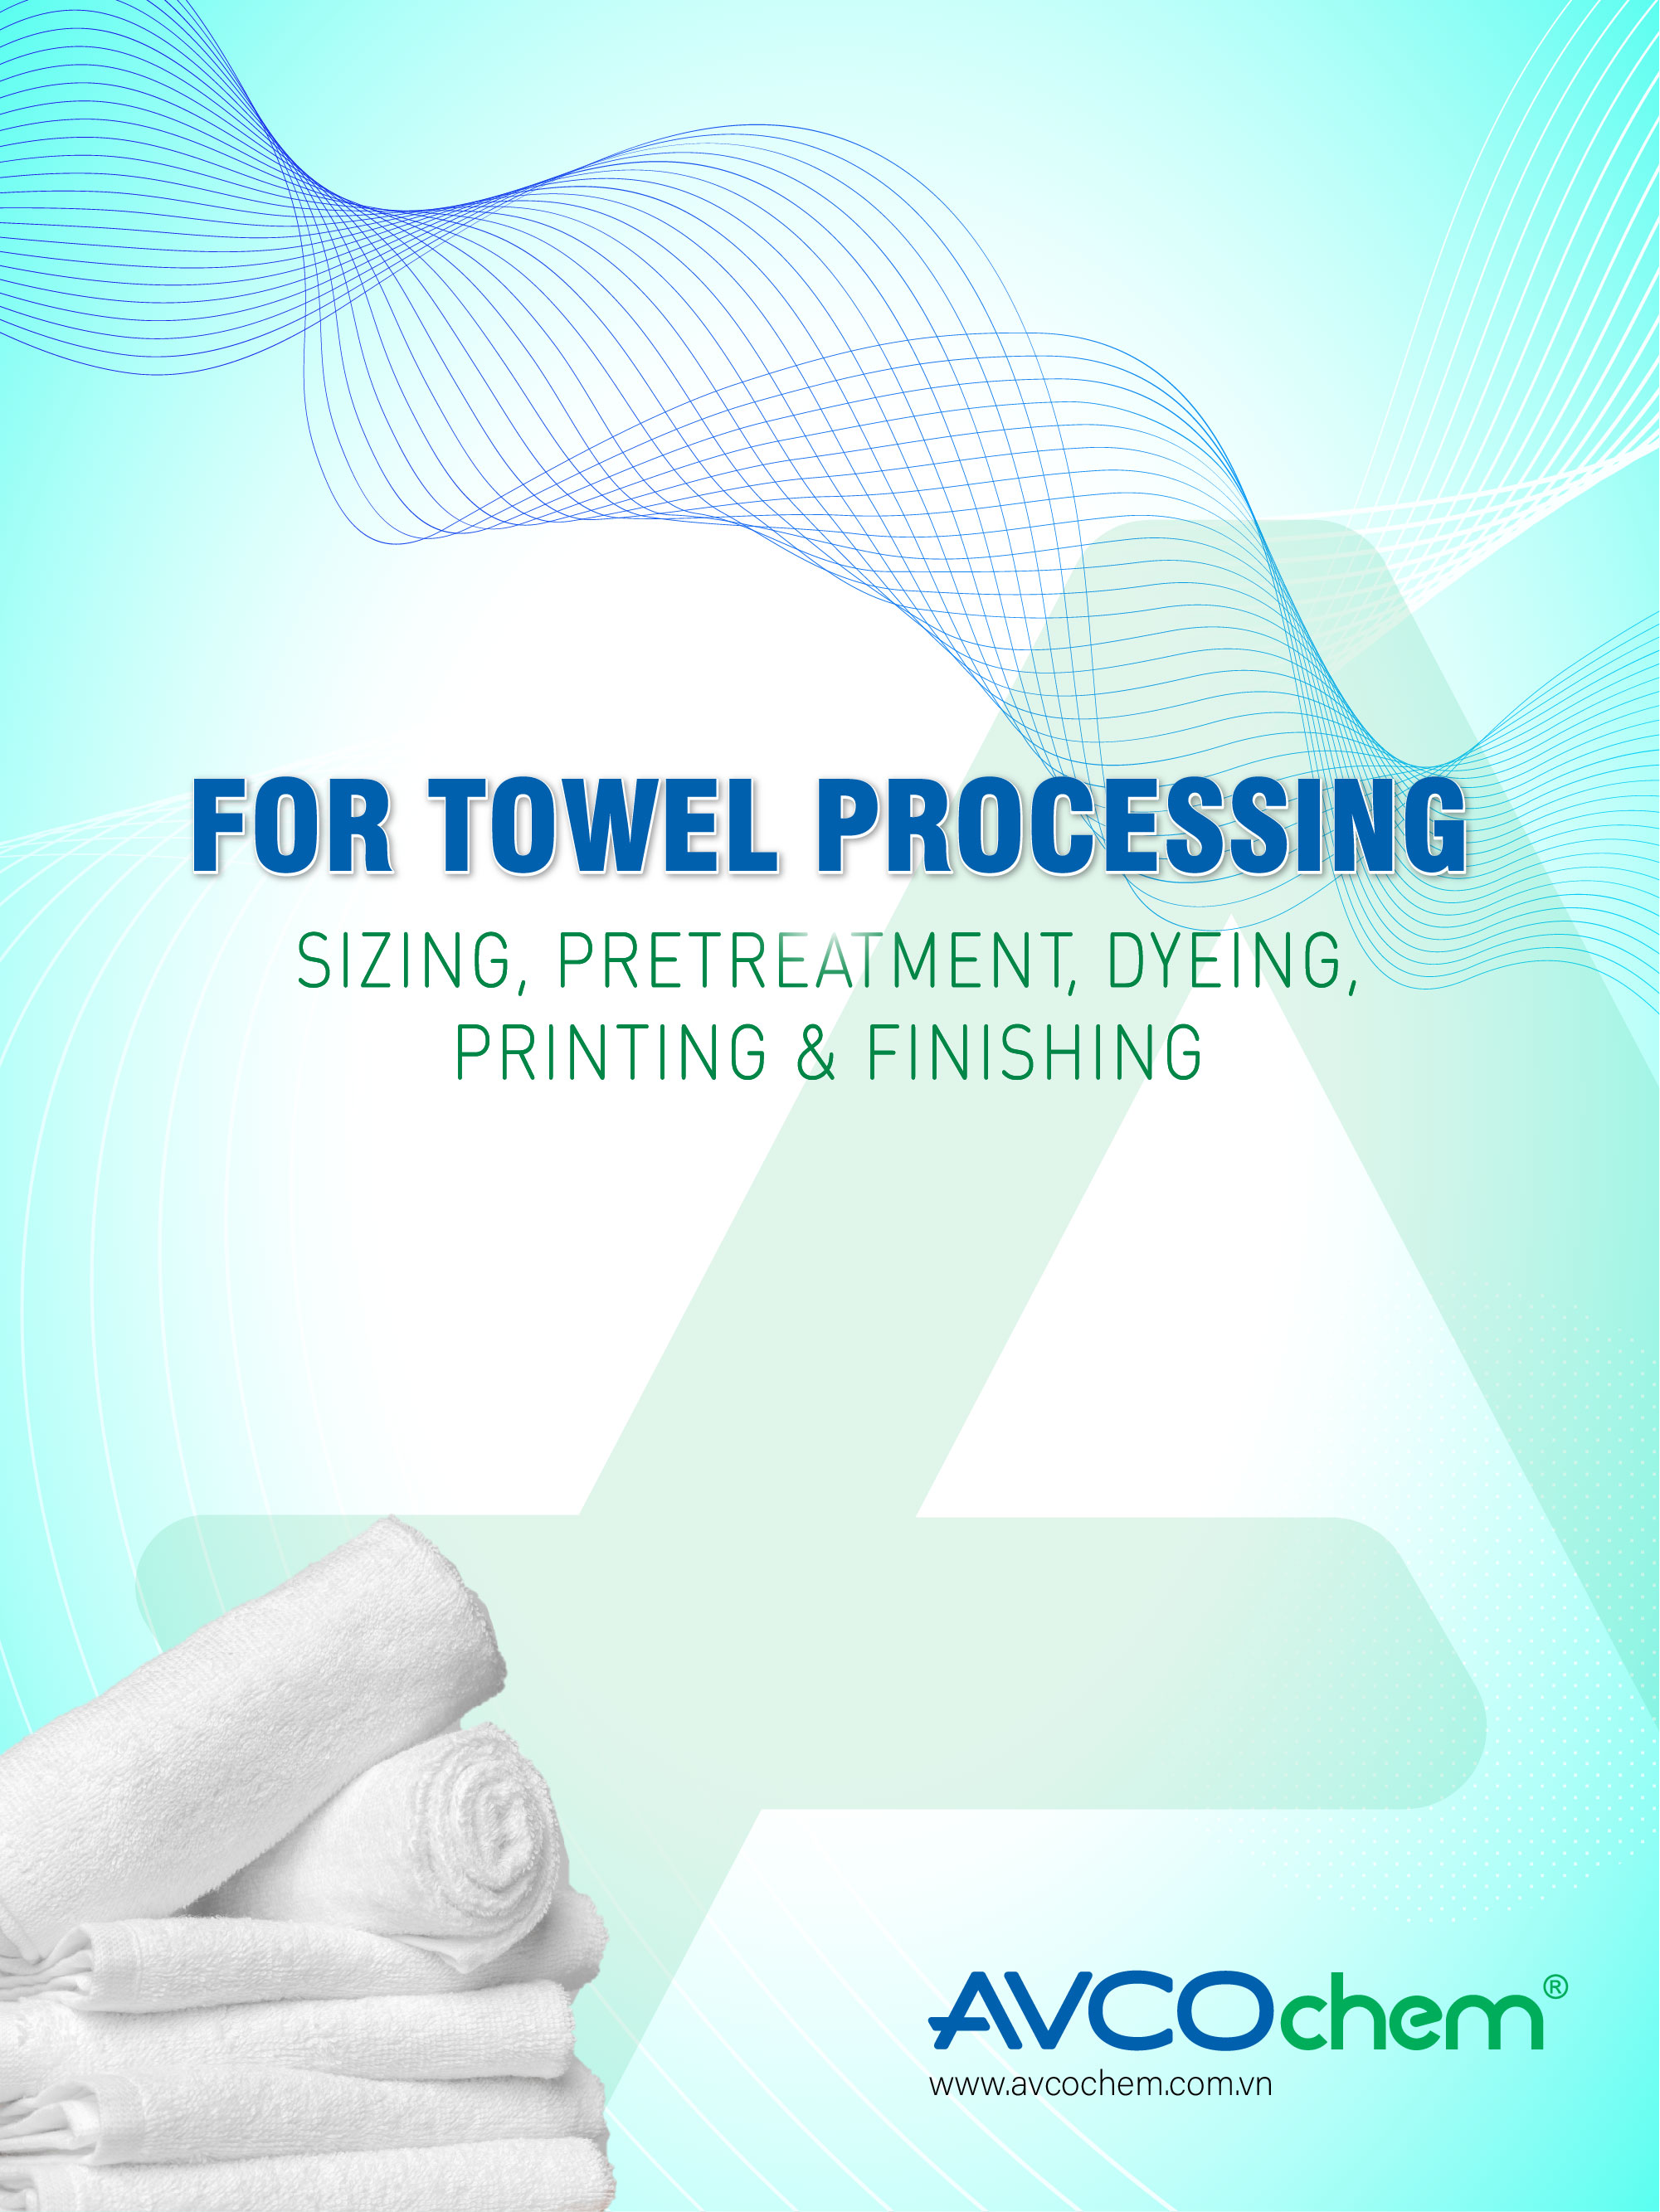 FOR TOWEL PROCESSING